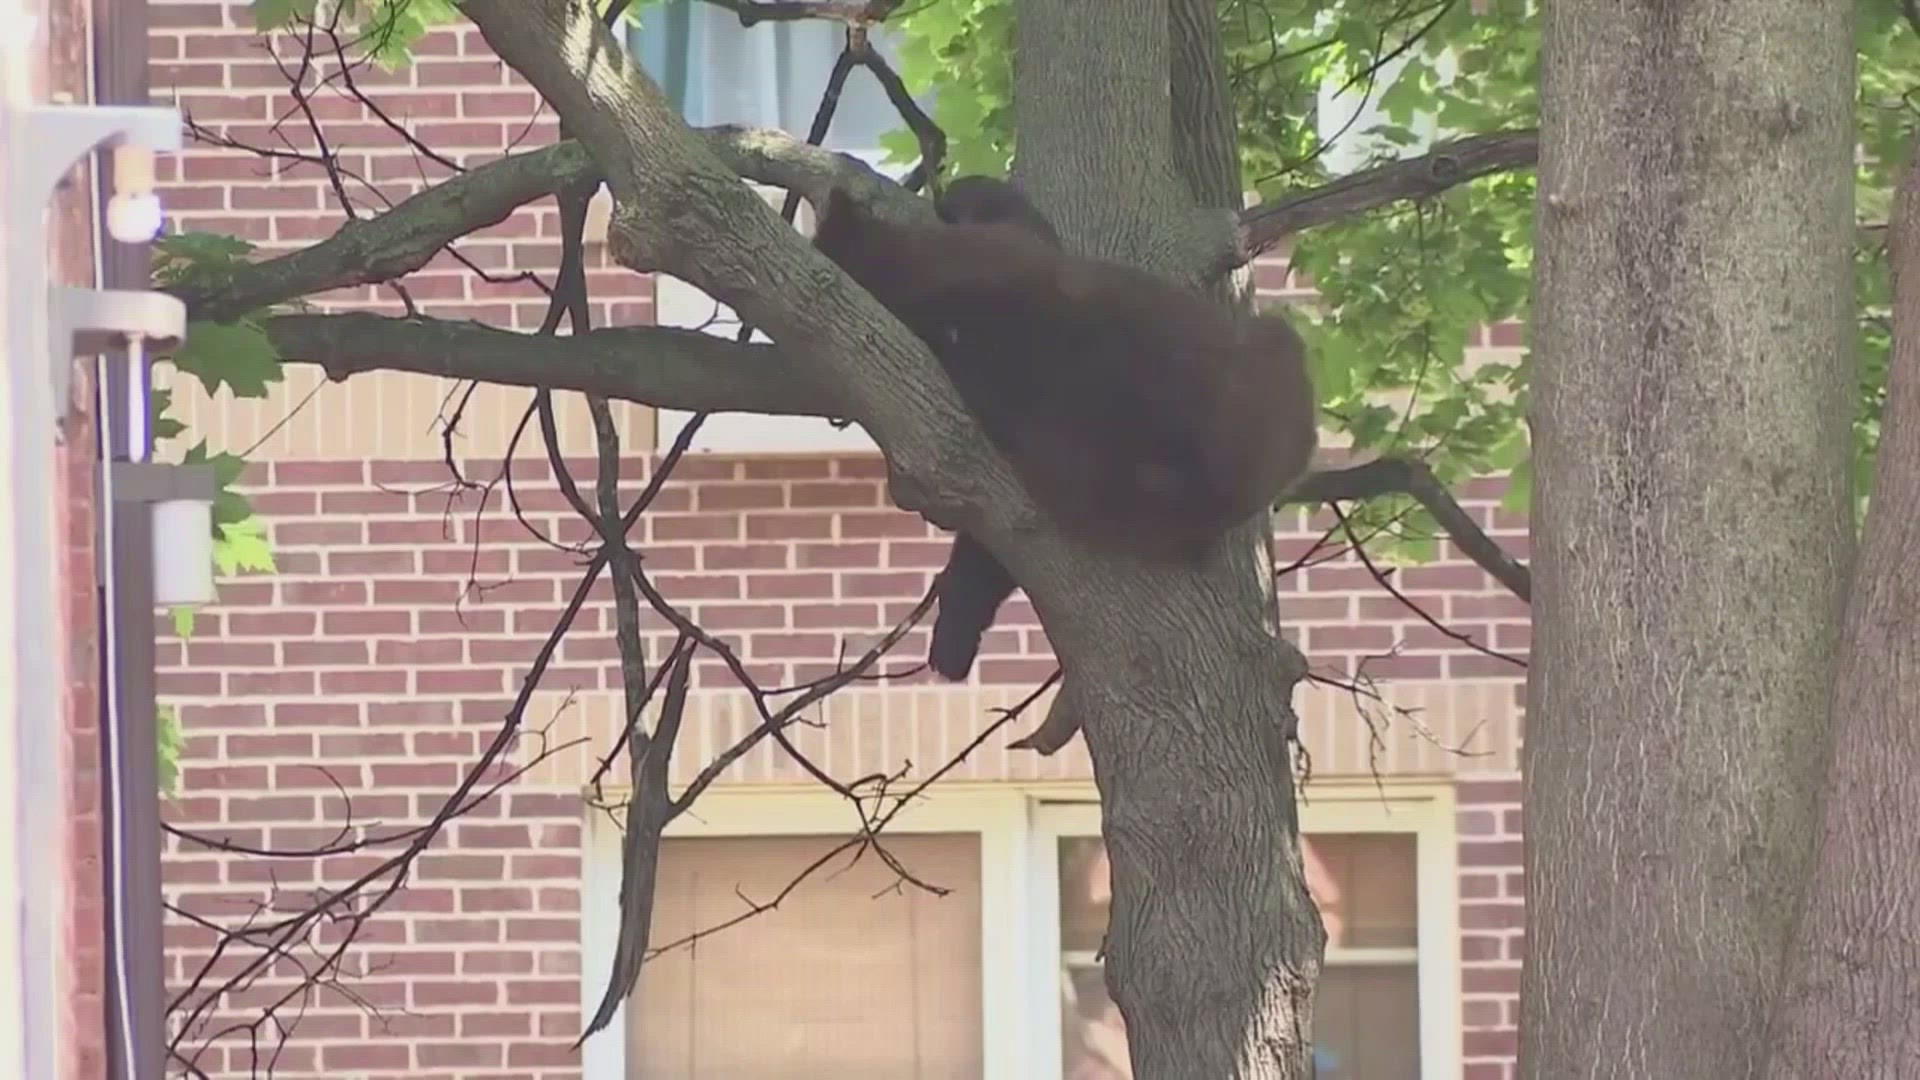 The bear was spotted around 1 p.m. Friday.